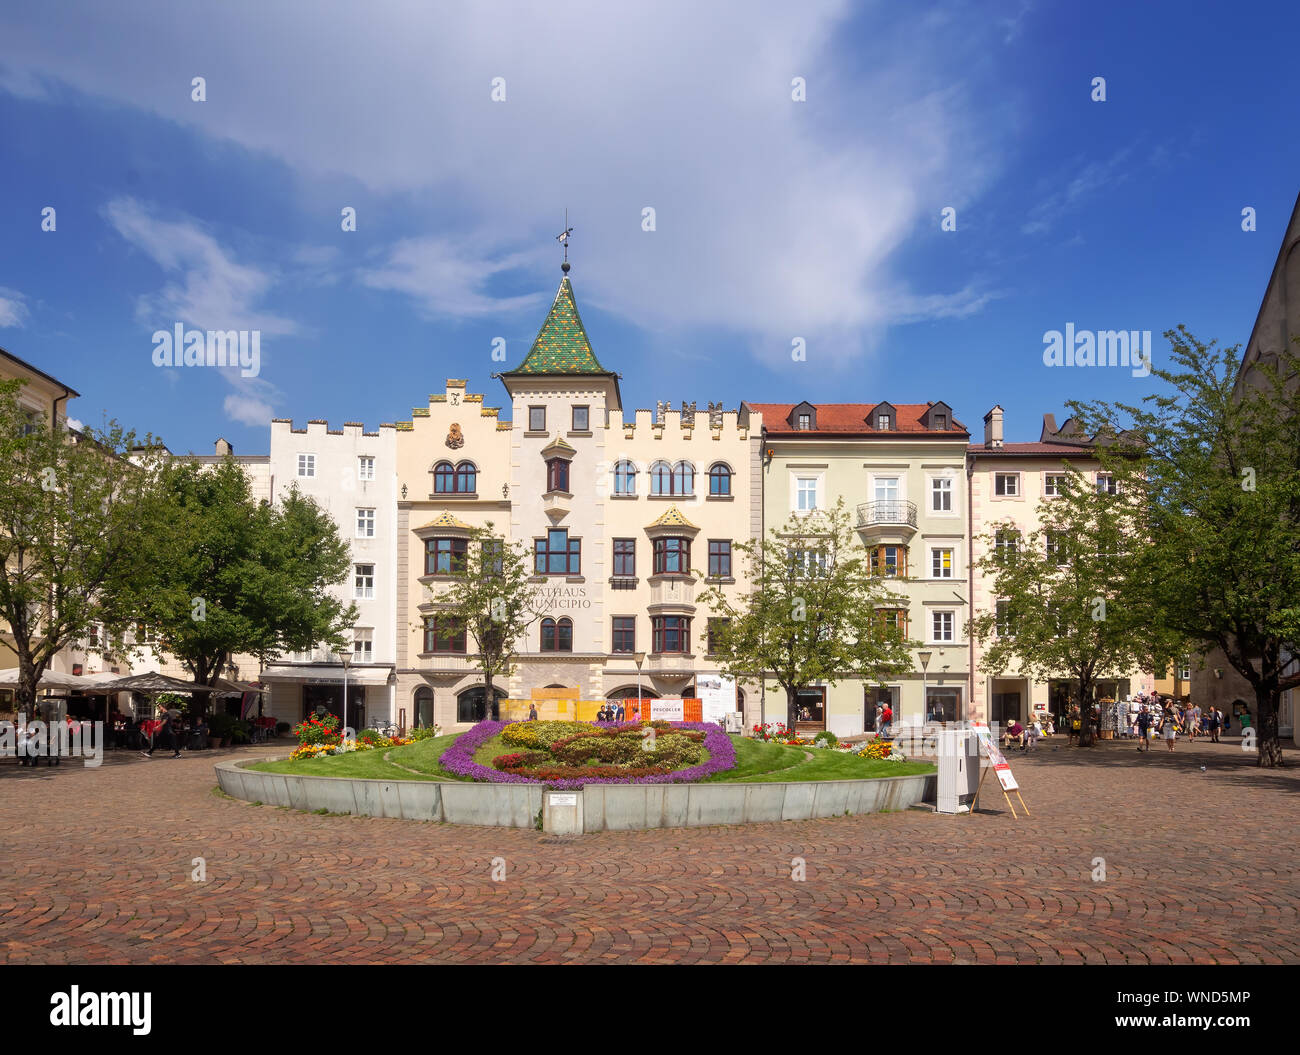 BRESSANONE, BRIXEN, ITALY - AUGUST 31, 2019: View of the Rathaus ie main Council building, in the Piazza Duomo. Stock Photo